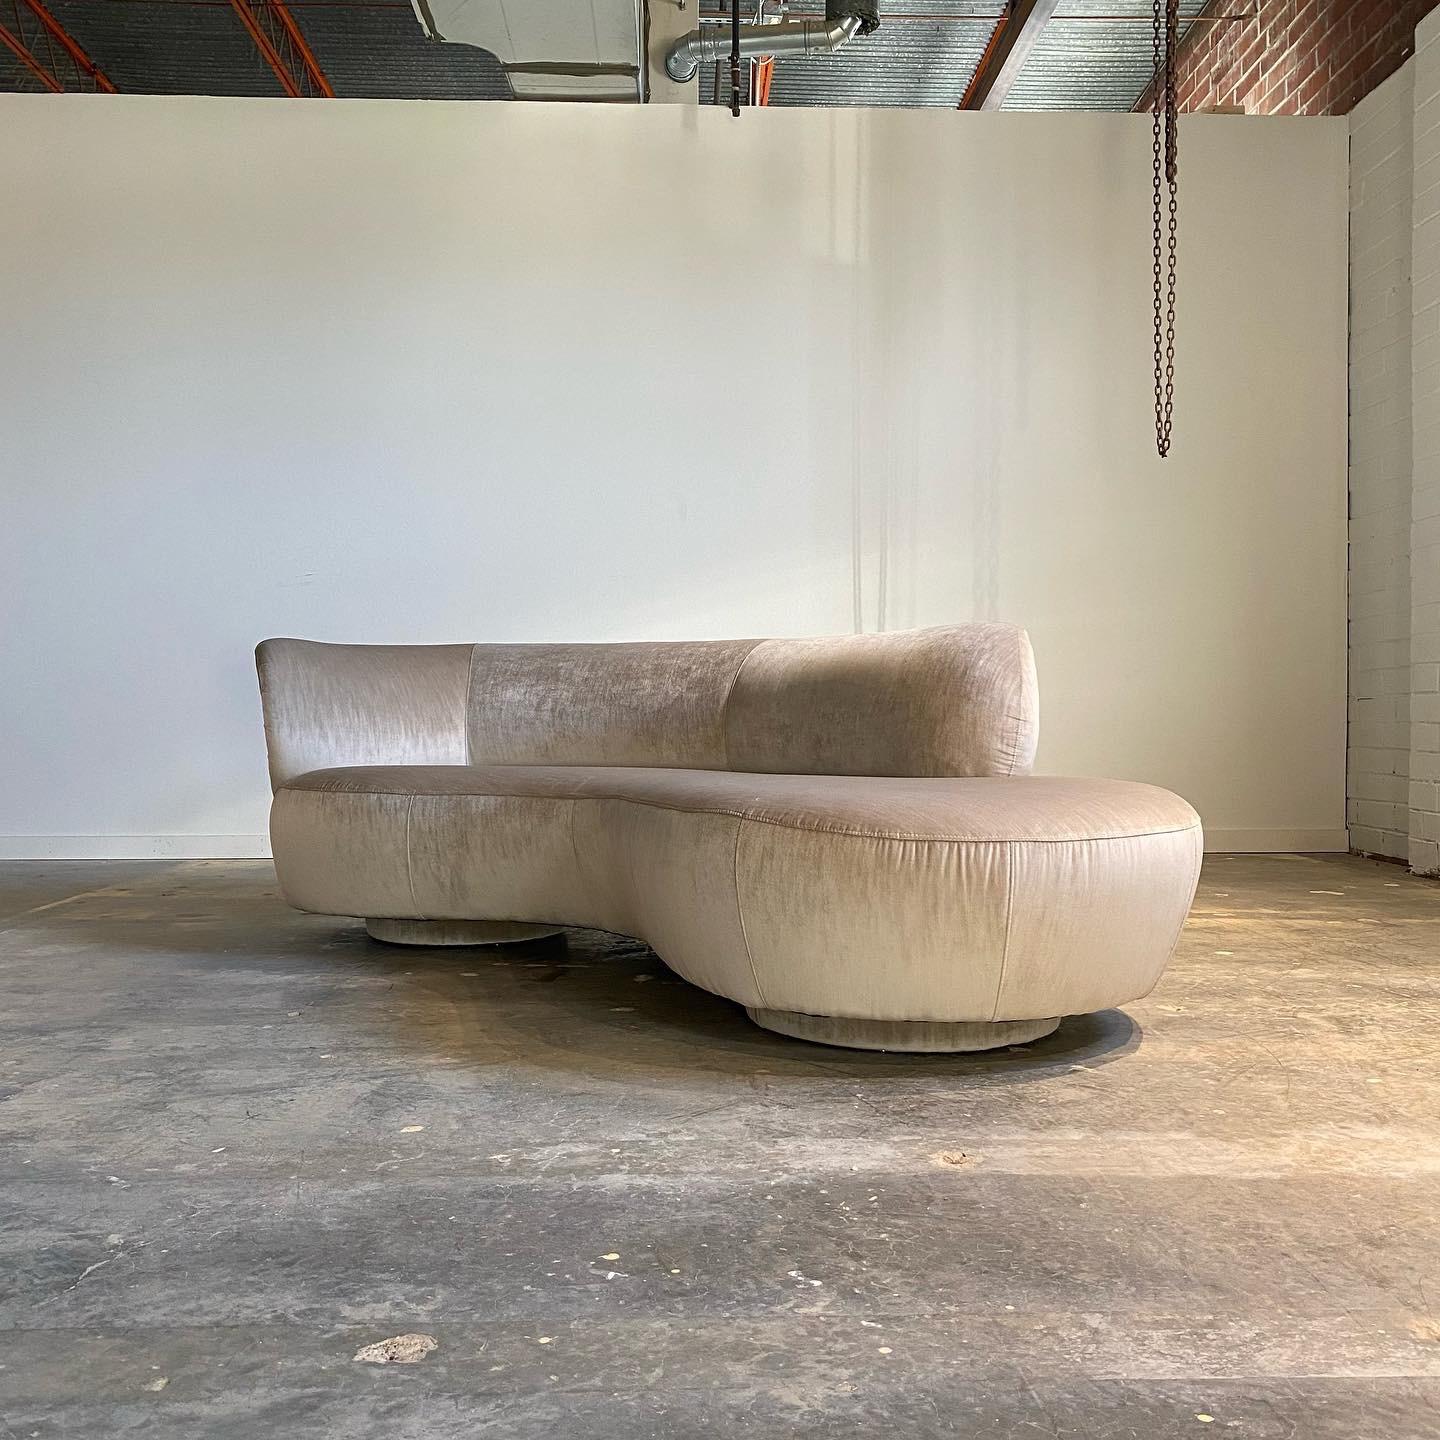 With sculptural curves and organic shape this vintage sofa looks great from all sides. Expertly recovered in a champagne velvet and ready to place. A stunning vintage design with an aesthetic sure to last.